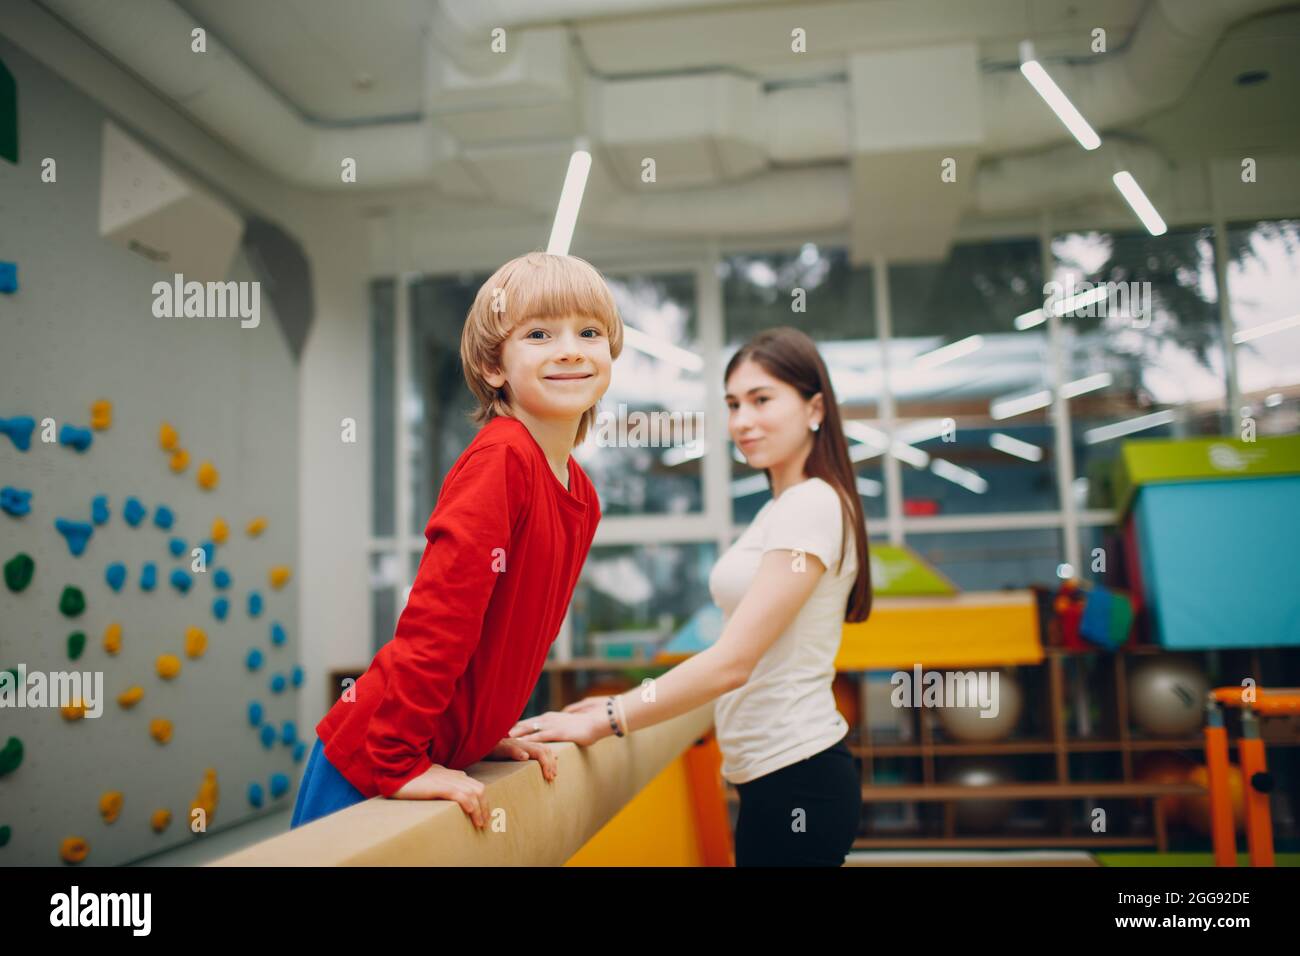 Kids doing balance beam gymnastics exercises in gym at kindergarten or elementary school. Children sport and fitness concept Stock Photo